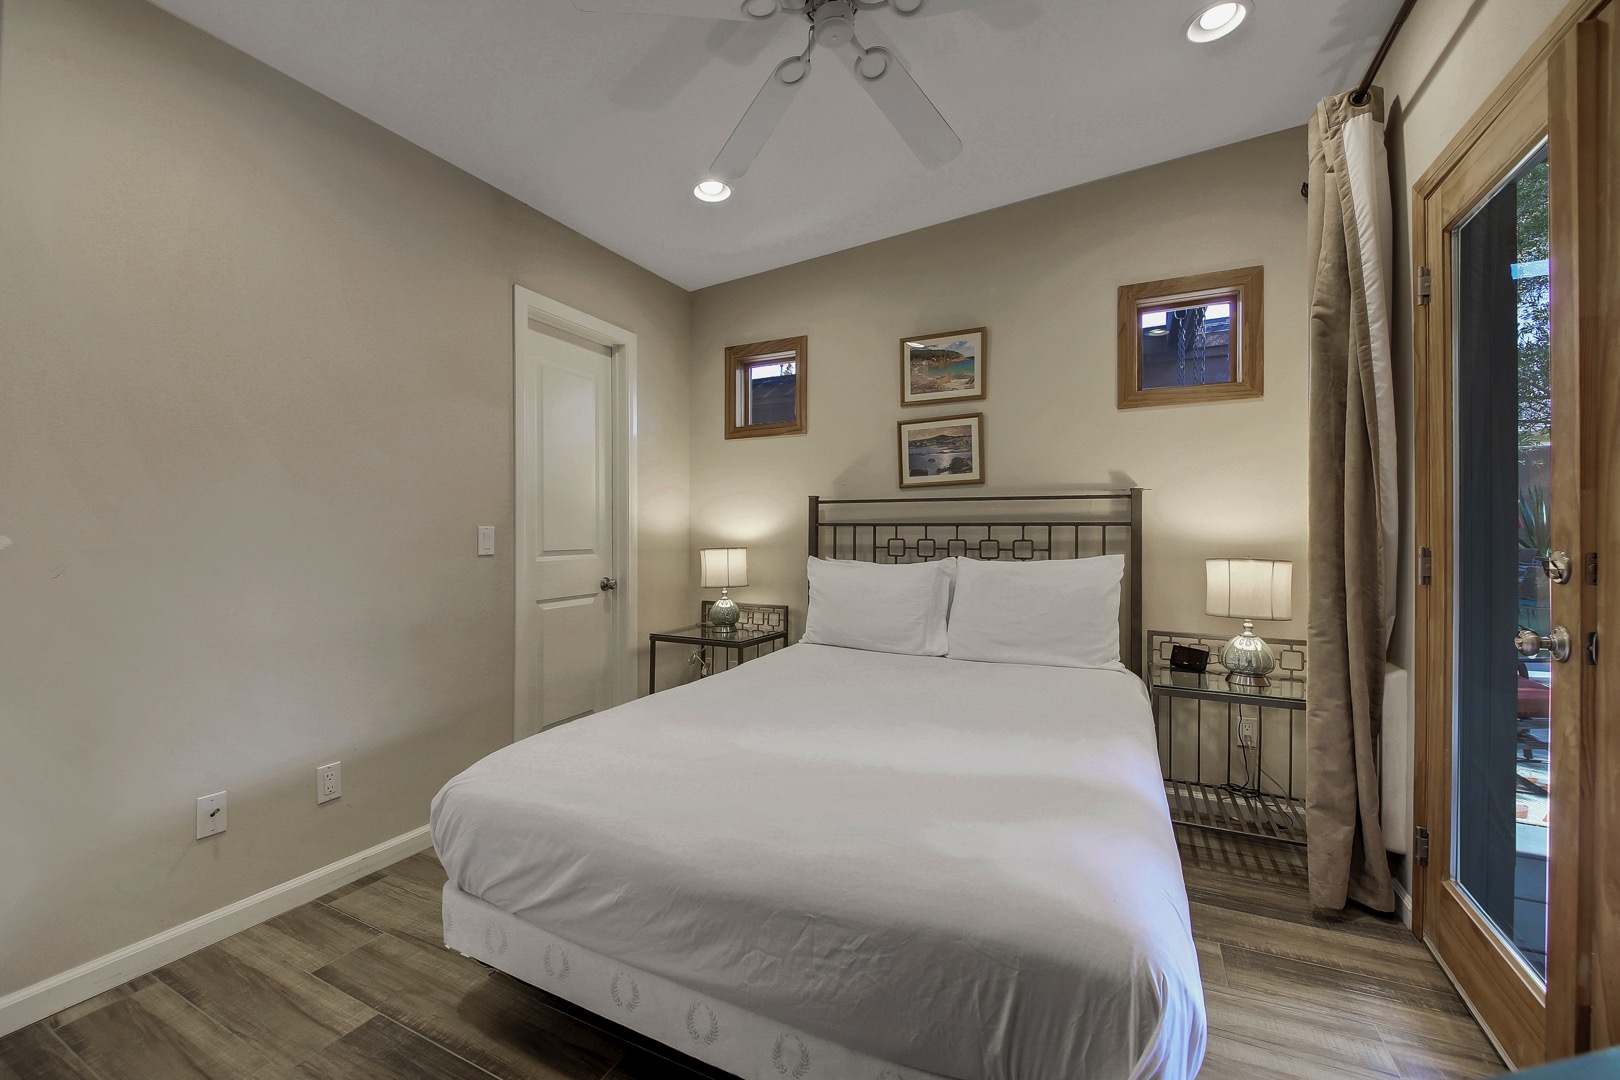 Suite 3 features a Full-sized bed, Smart TV and has exterior doors to the ping pong patio as well as access to the dinning room,